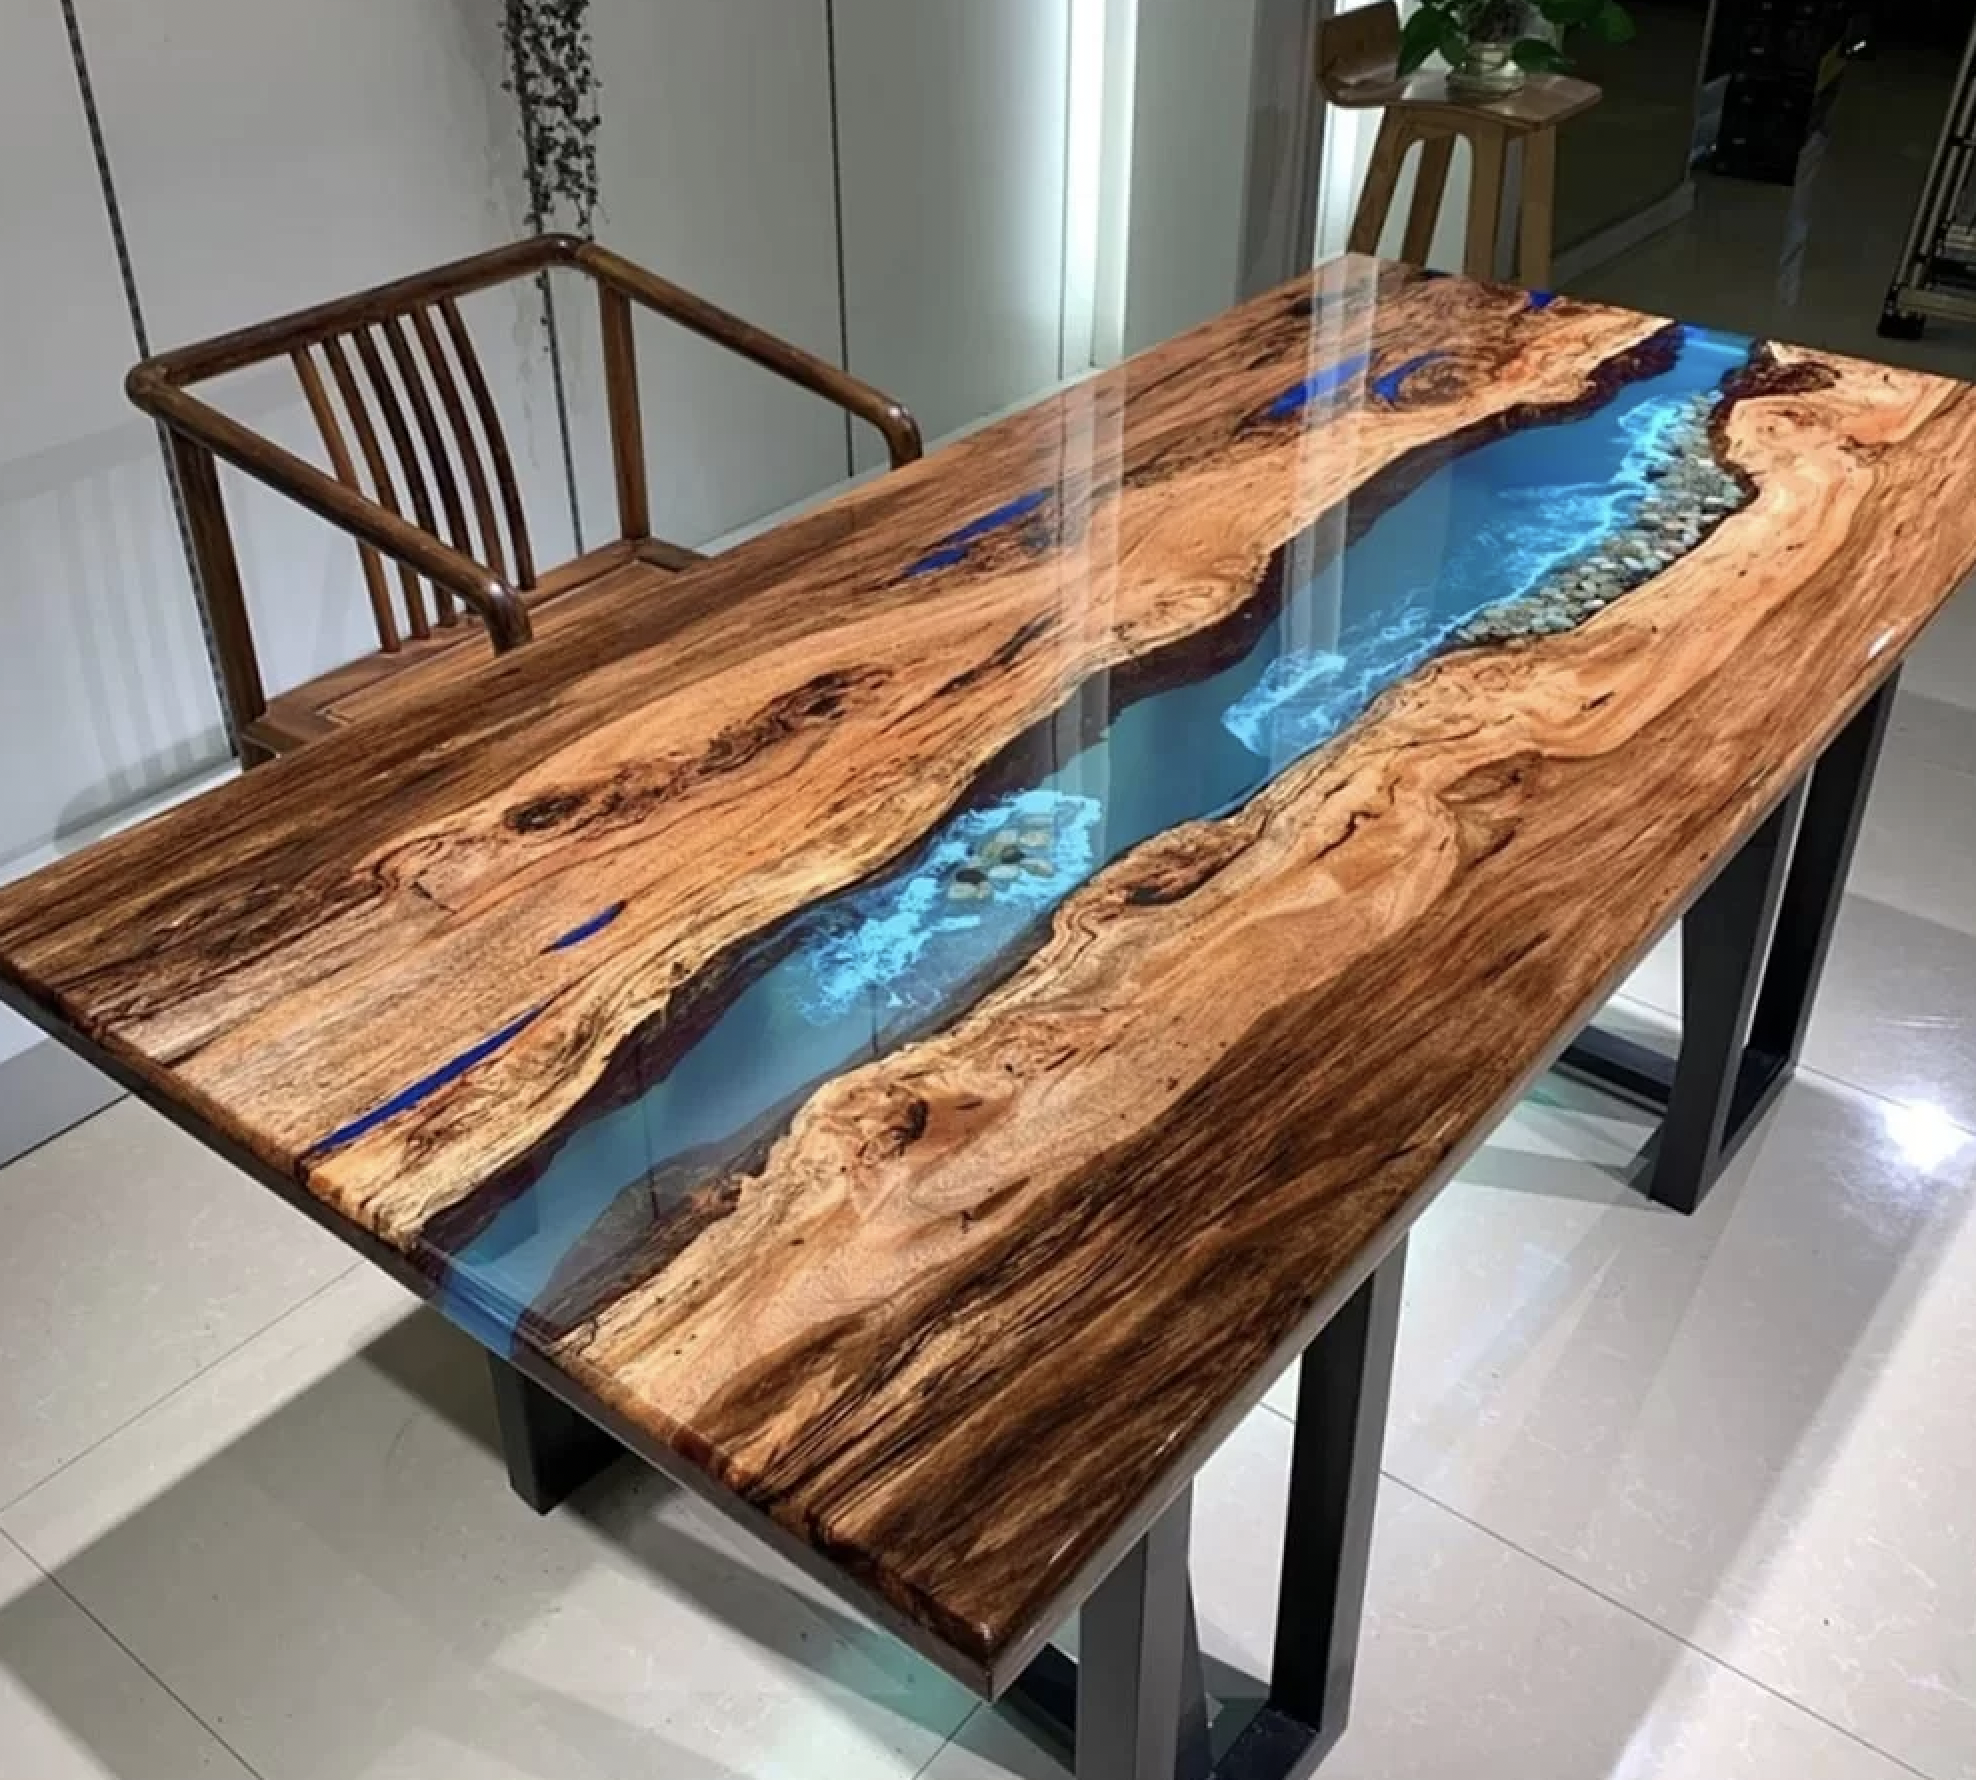 chilliwack epoxy tables buy custom made live edge wood slab epoxy tables in fraser valley british columbia canada